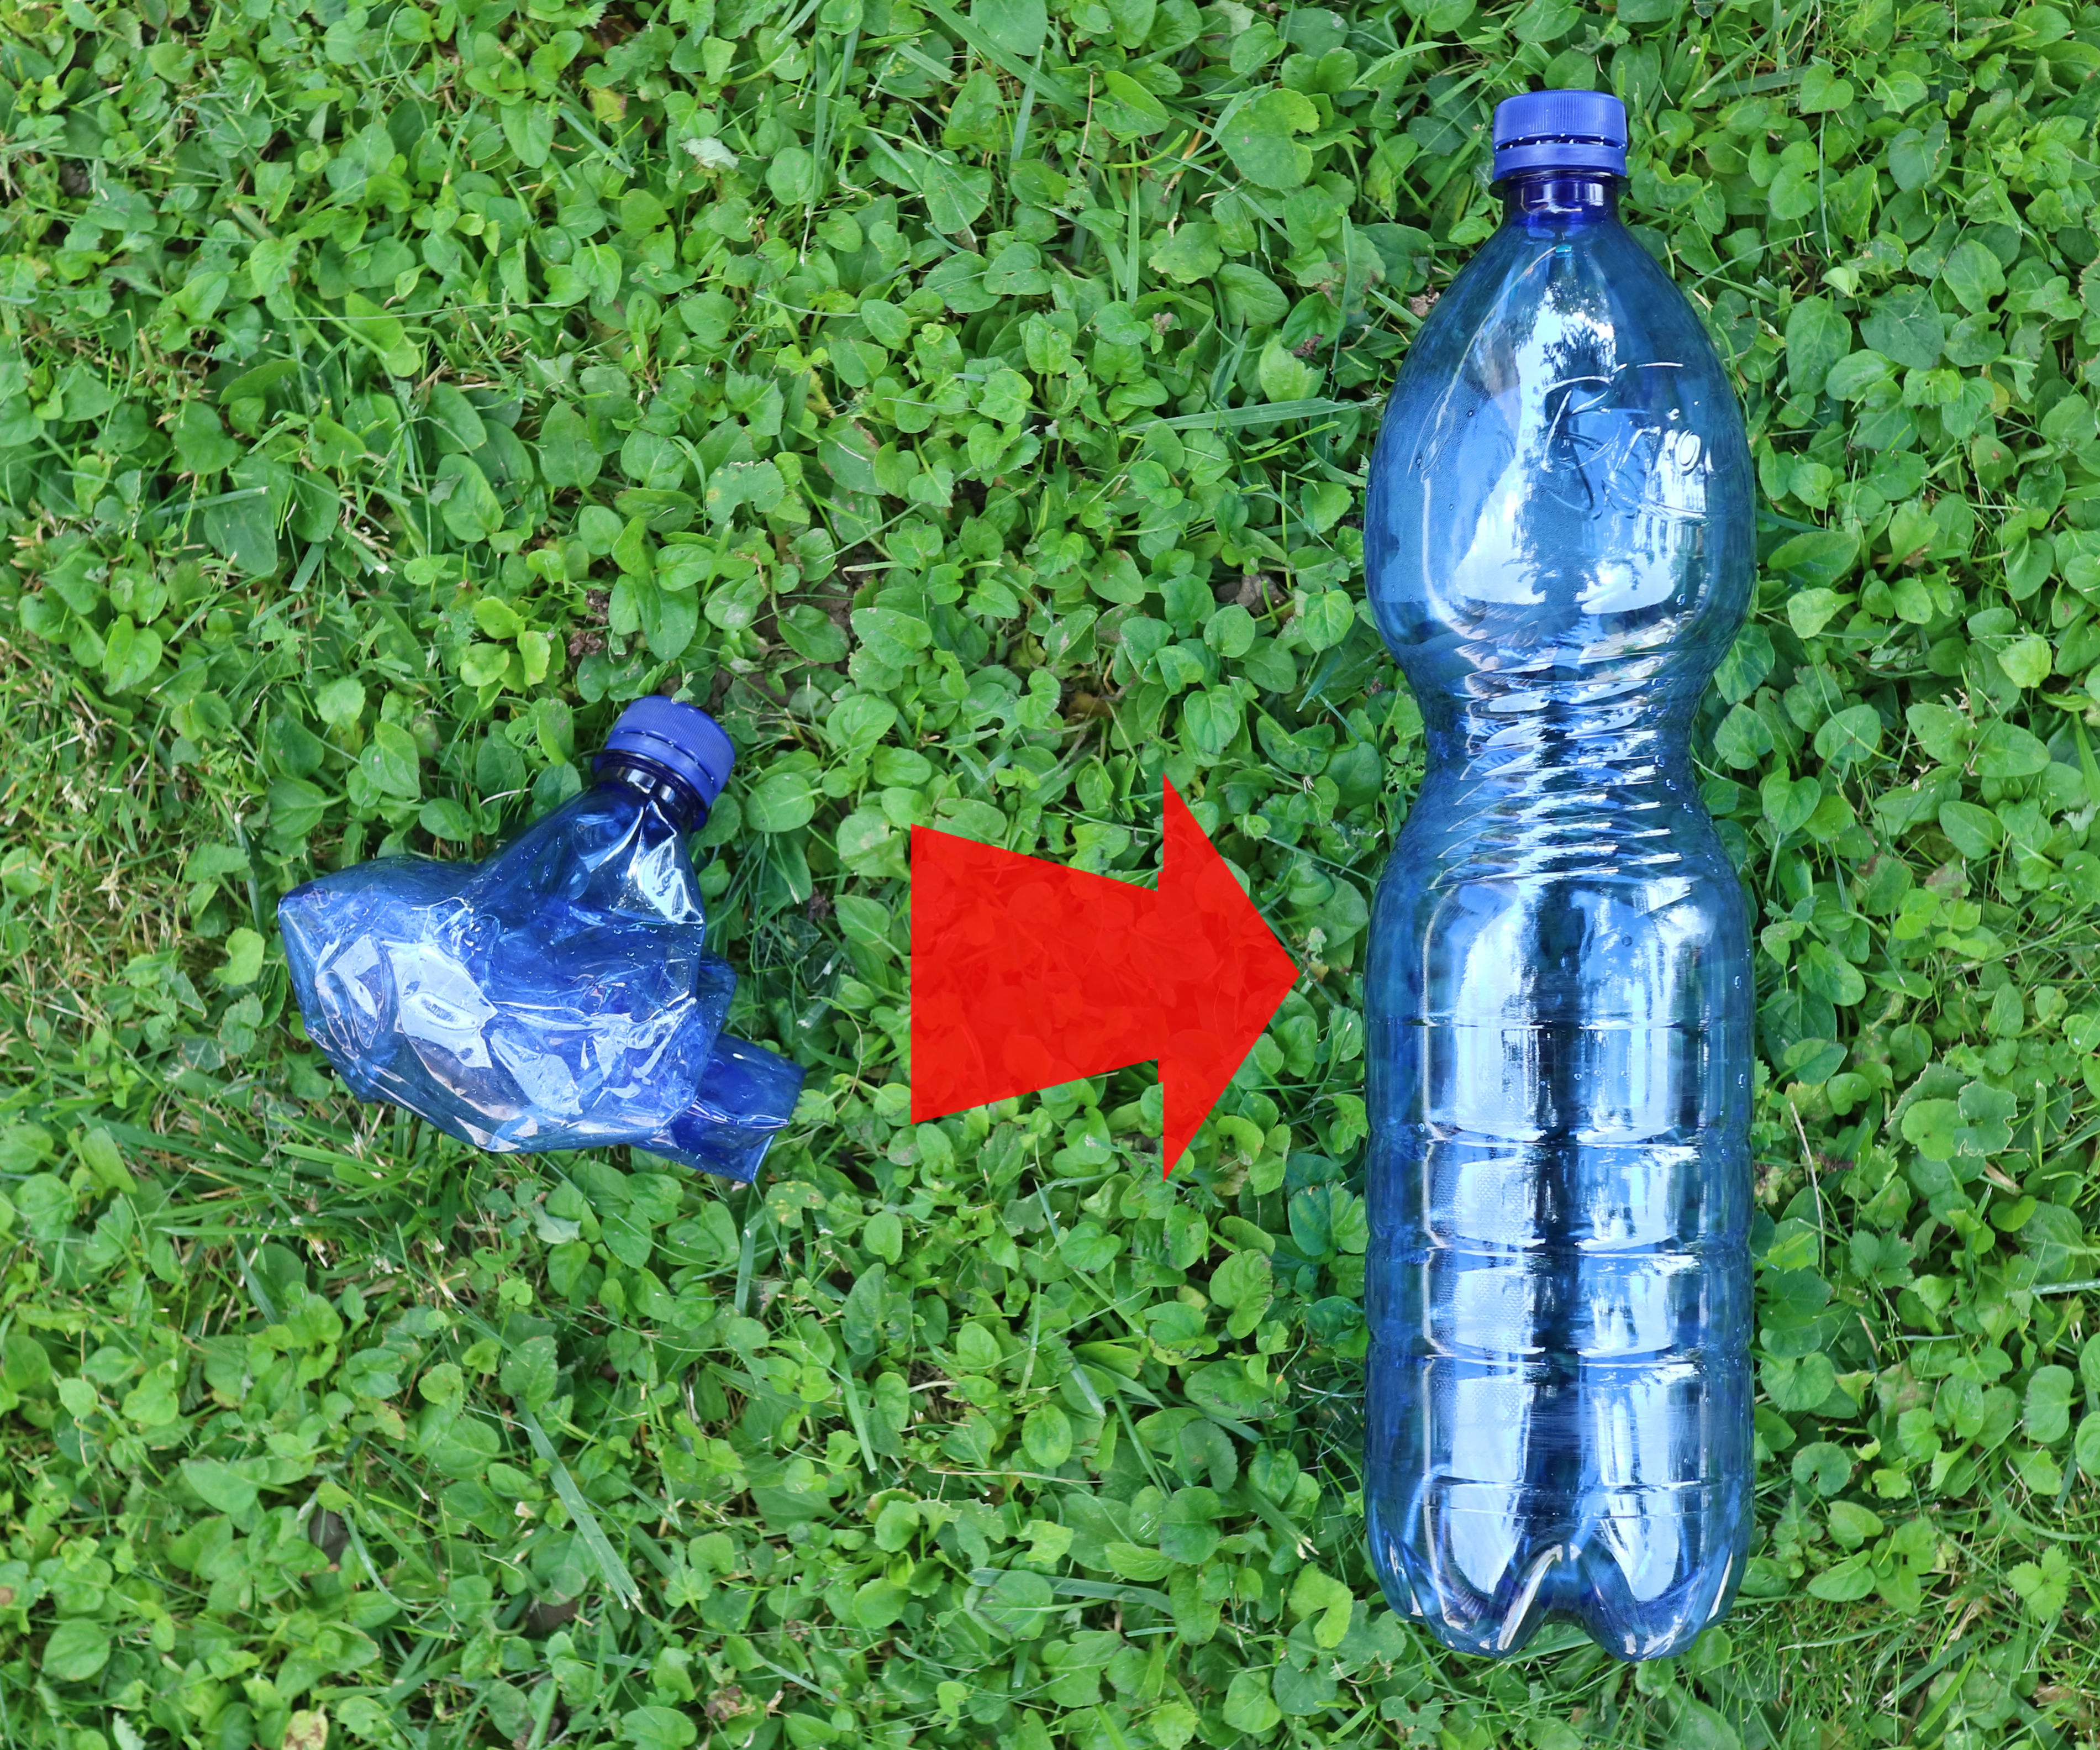 Restoring a Plastic Bottle Shape Without Blowing in It!